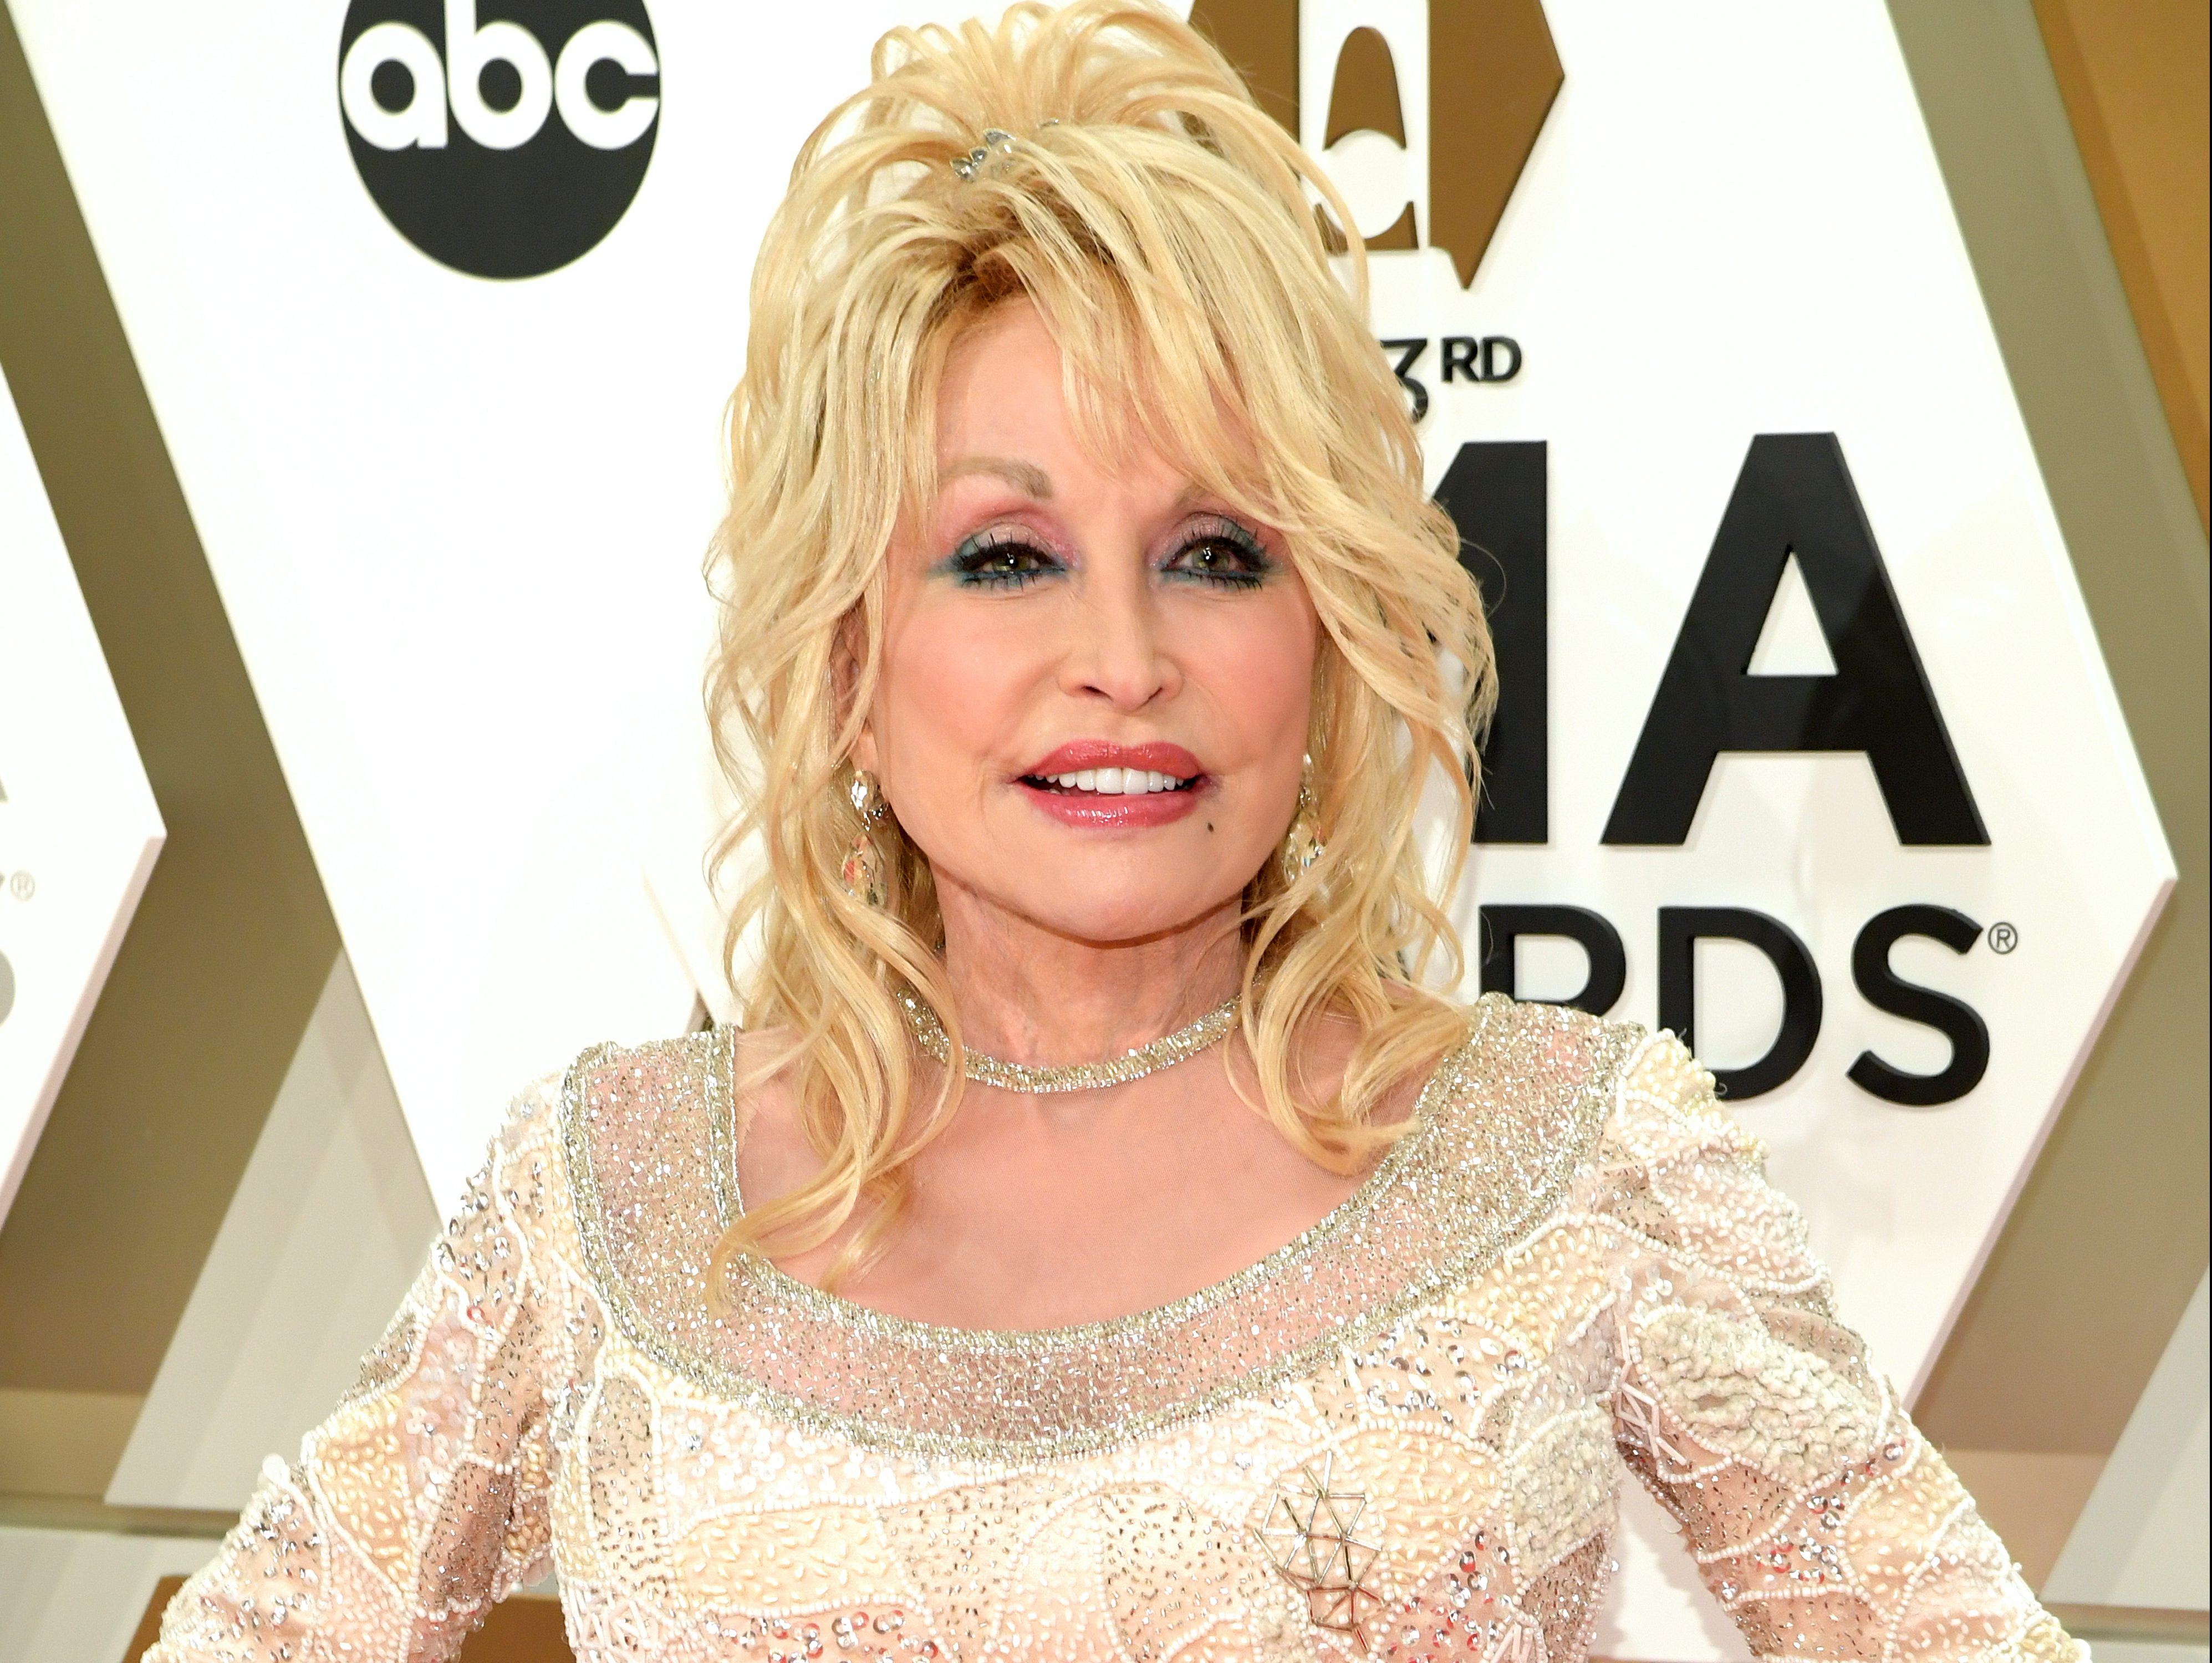 WORKING OVERTIME: Dolly Parton creating music for release after her death - torontosun.com